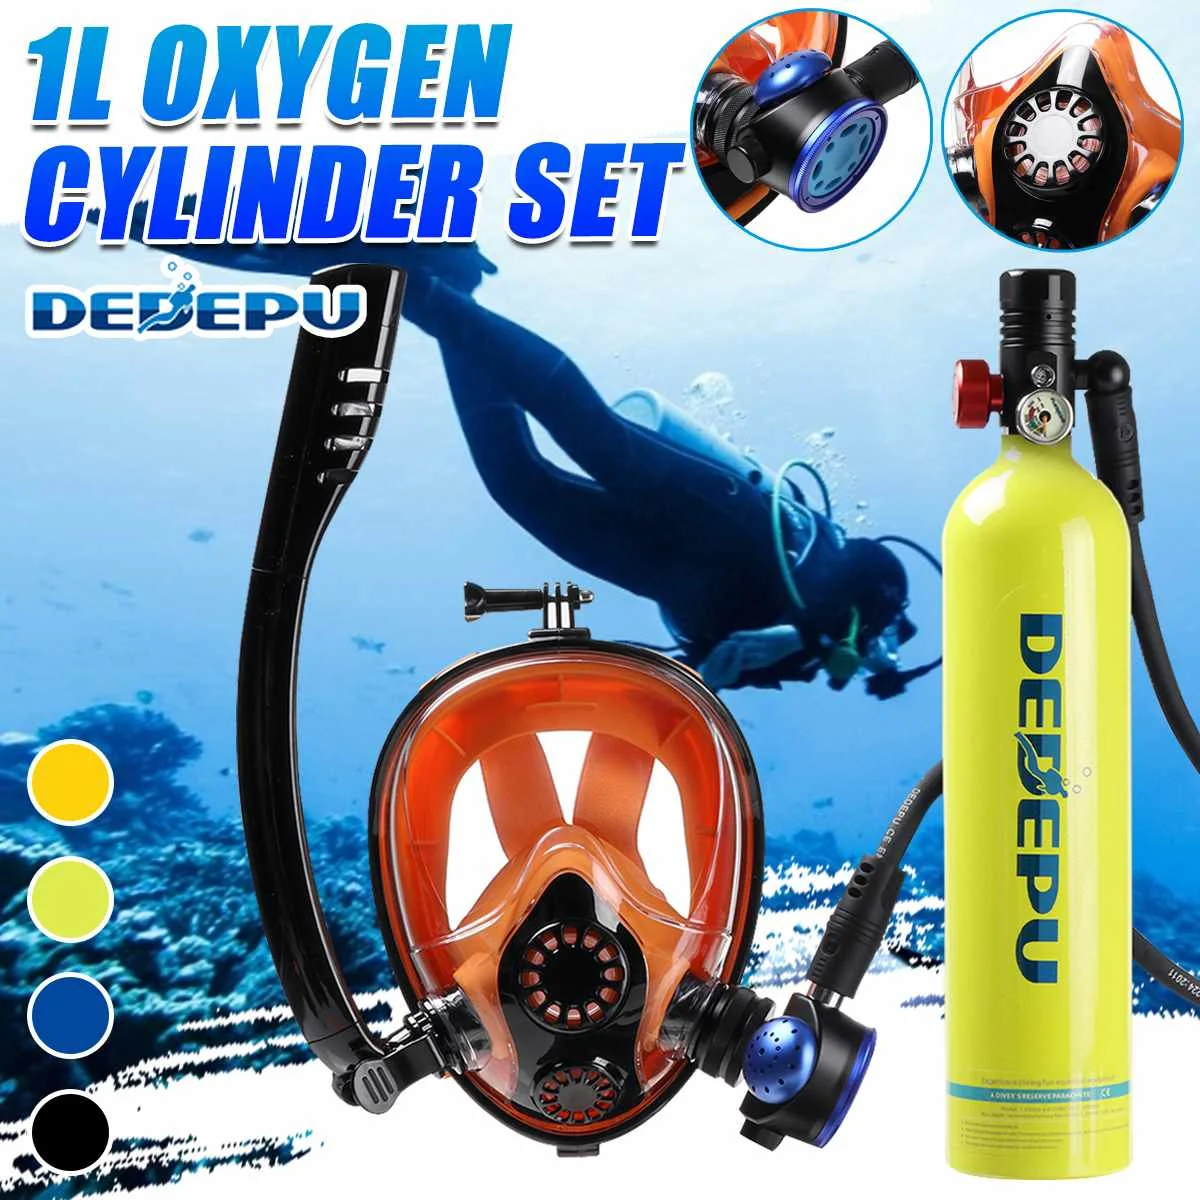 

DEDEPU 1L Oxygen Cylinder Scuba Diving Tank Dive Respirator Underwater Breathing Equipment Tool Set with Full Face Snorkel Mask